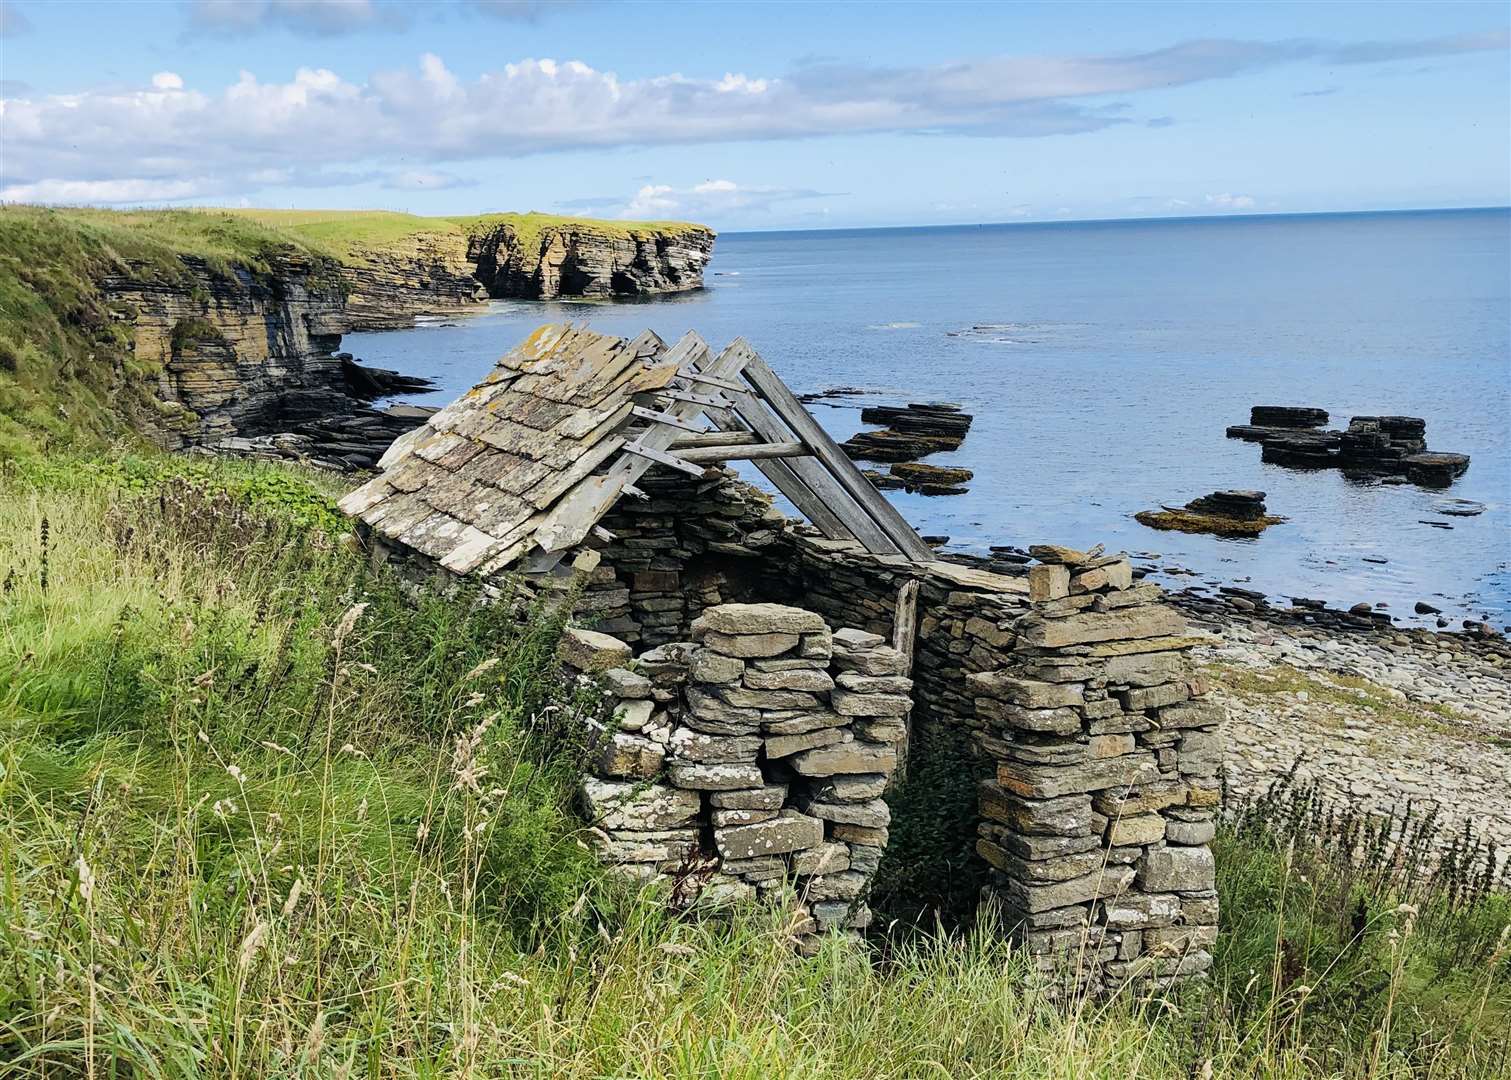 The old fisherman’s bothy at the old harbour at Nybster with the rugged cliffs of Caithness in the background, pictured by Lyall Rennie.